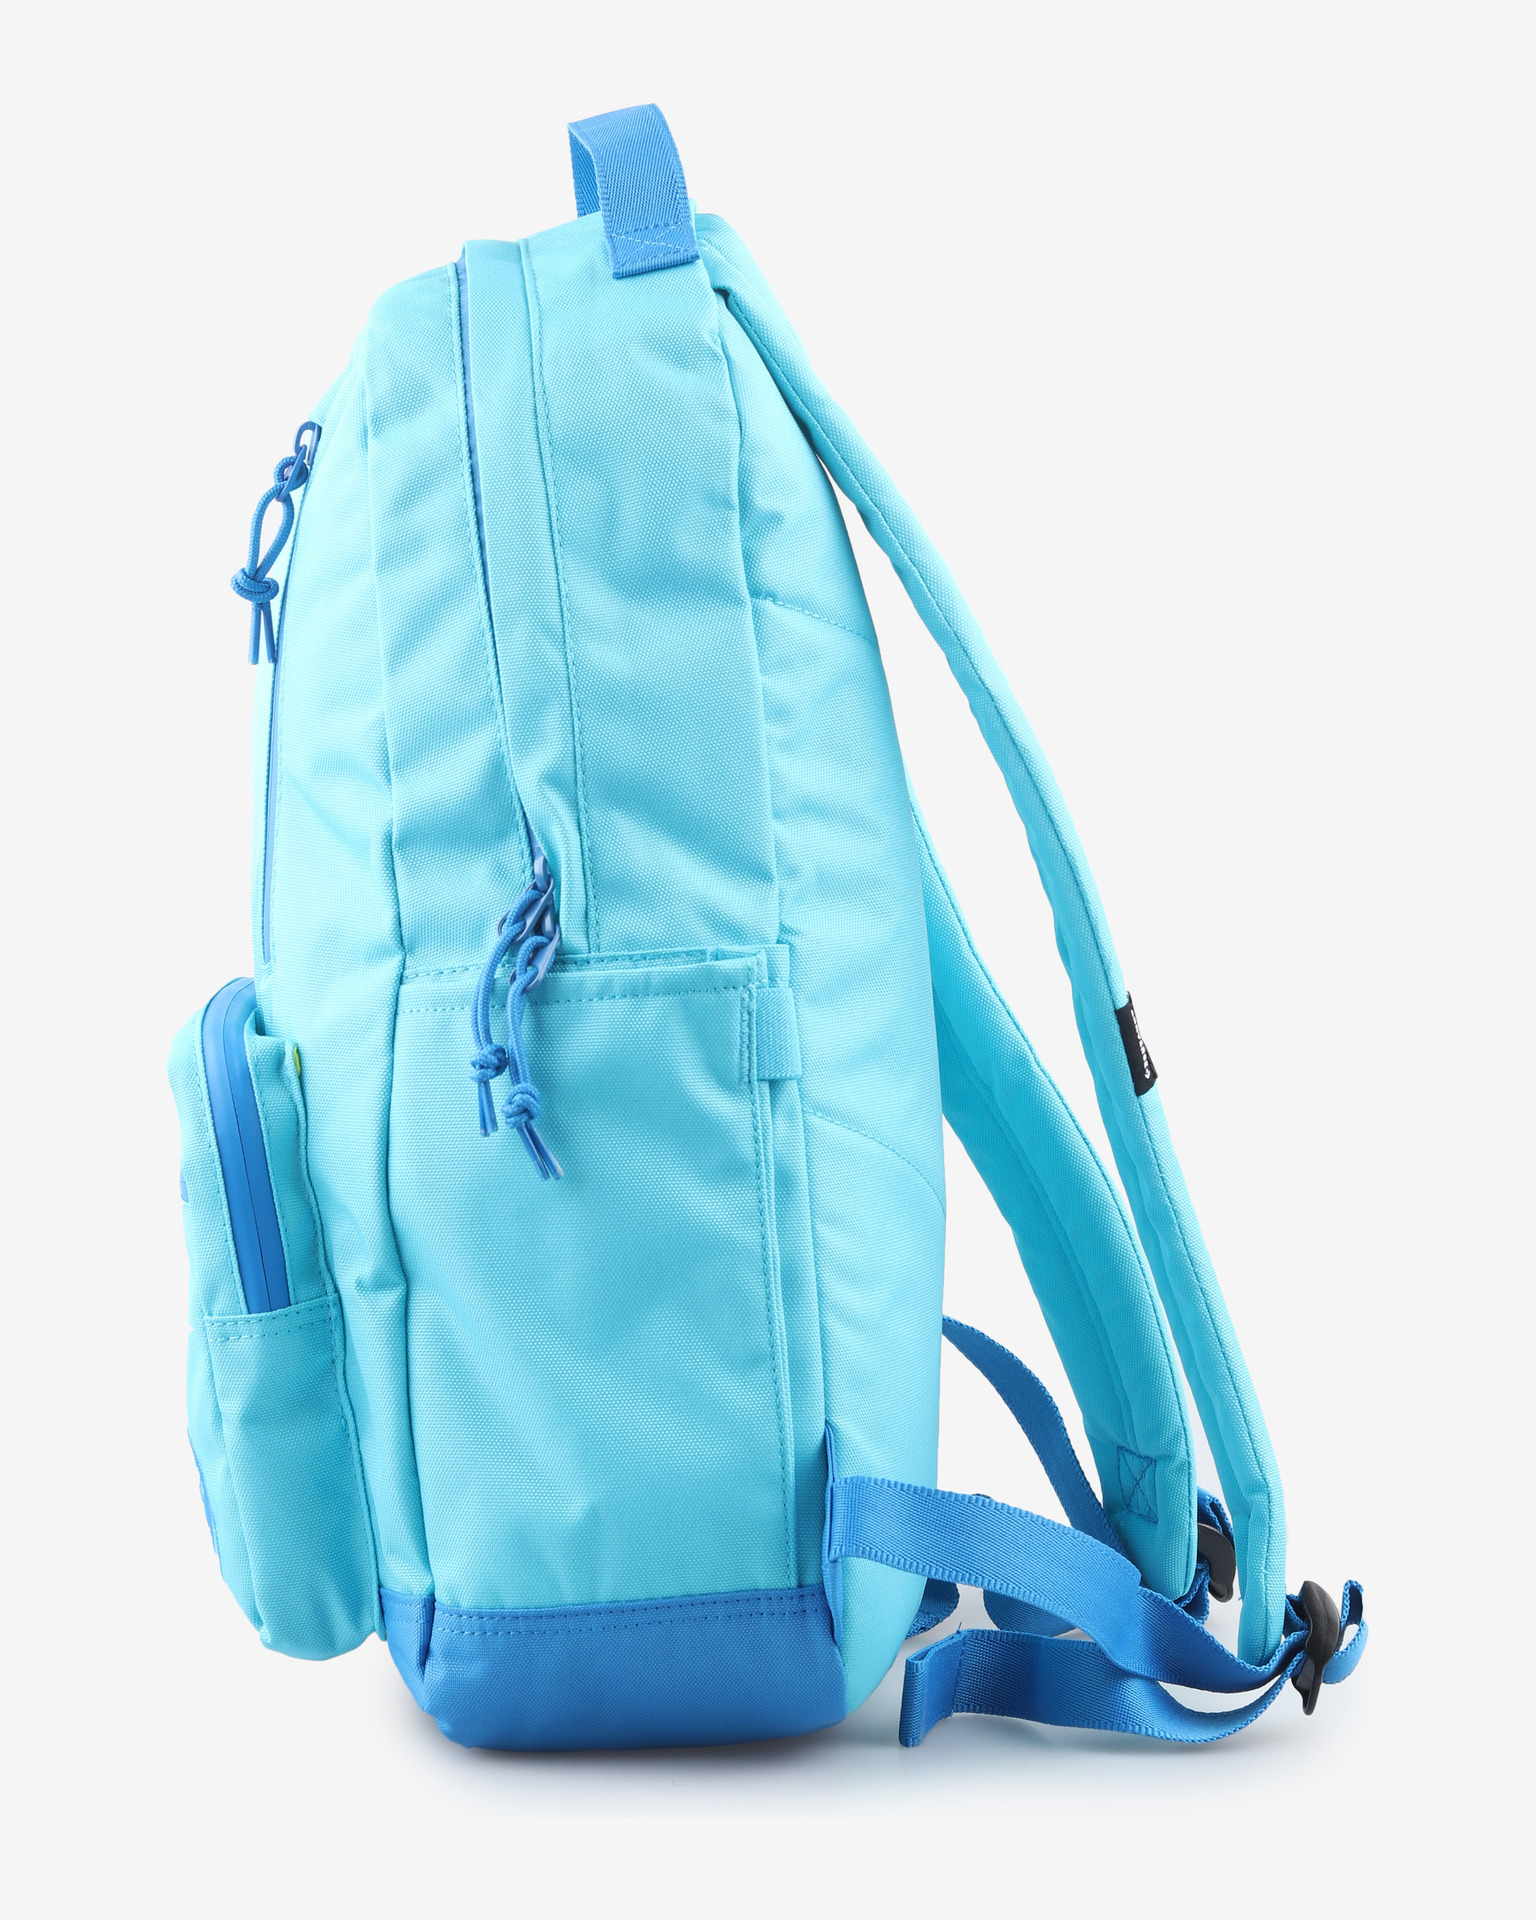 Converse - Go Backpack 